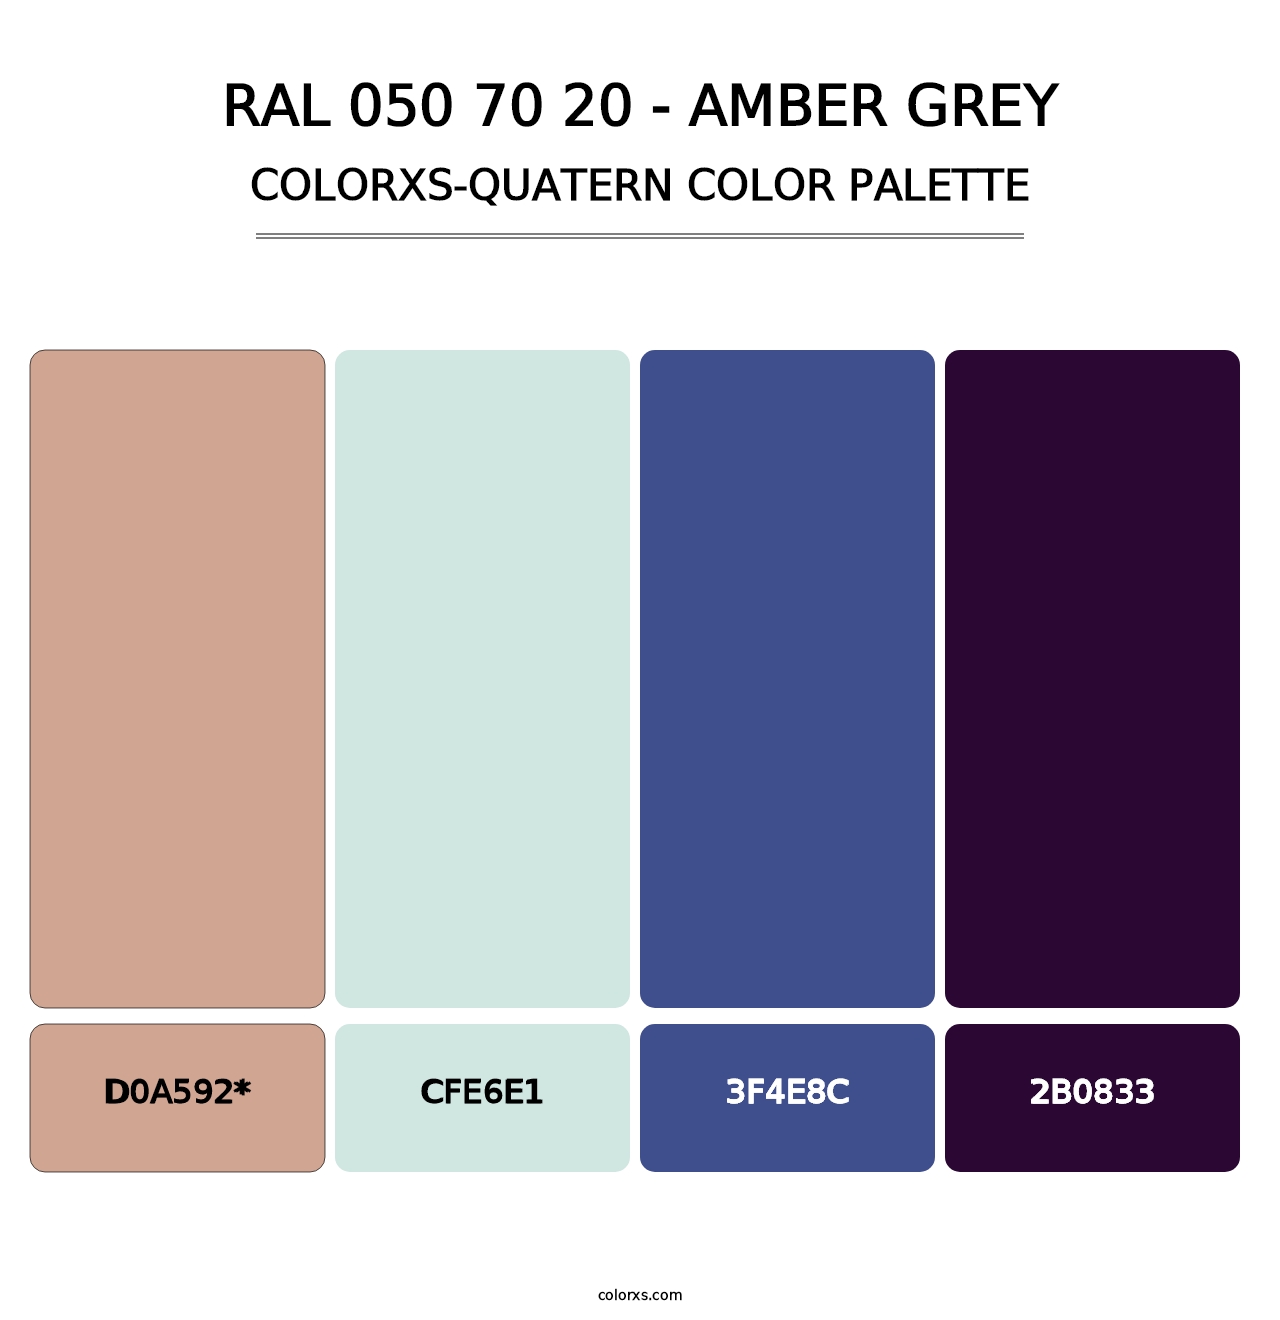 RAL 050 70 20 - Amber Grey - Colorxs Quatern Palette